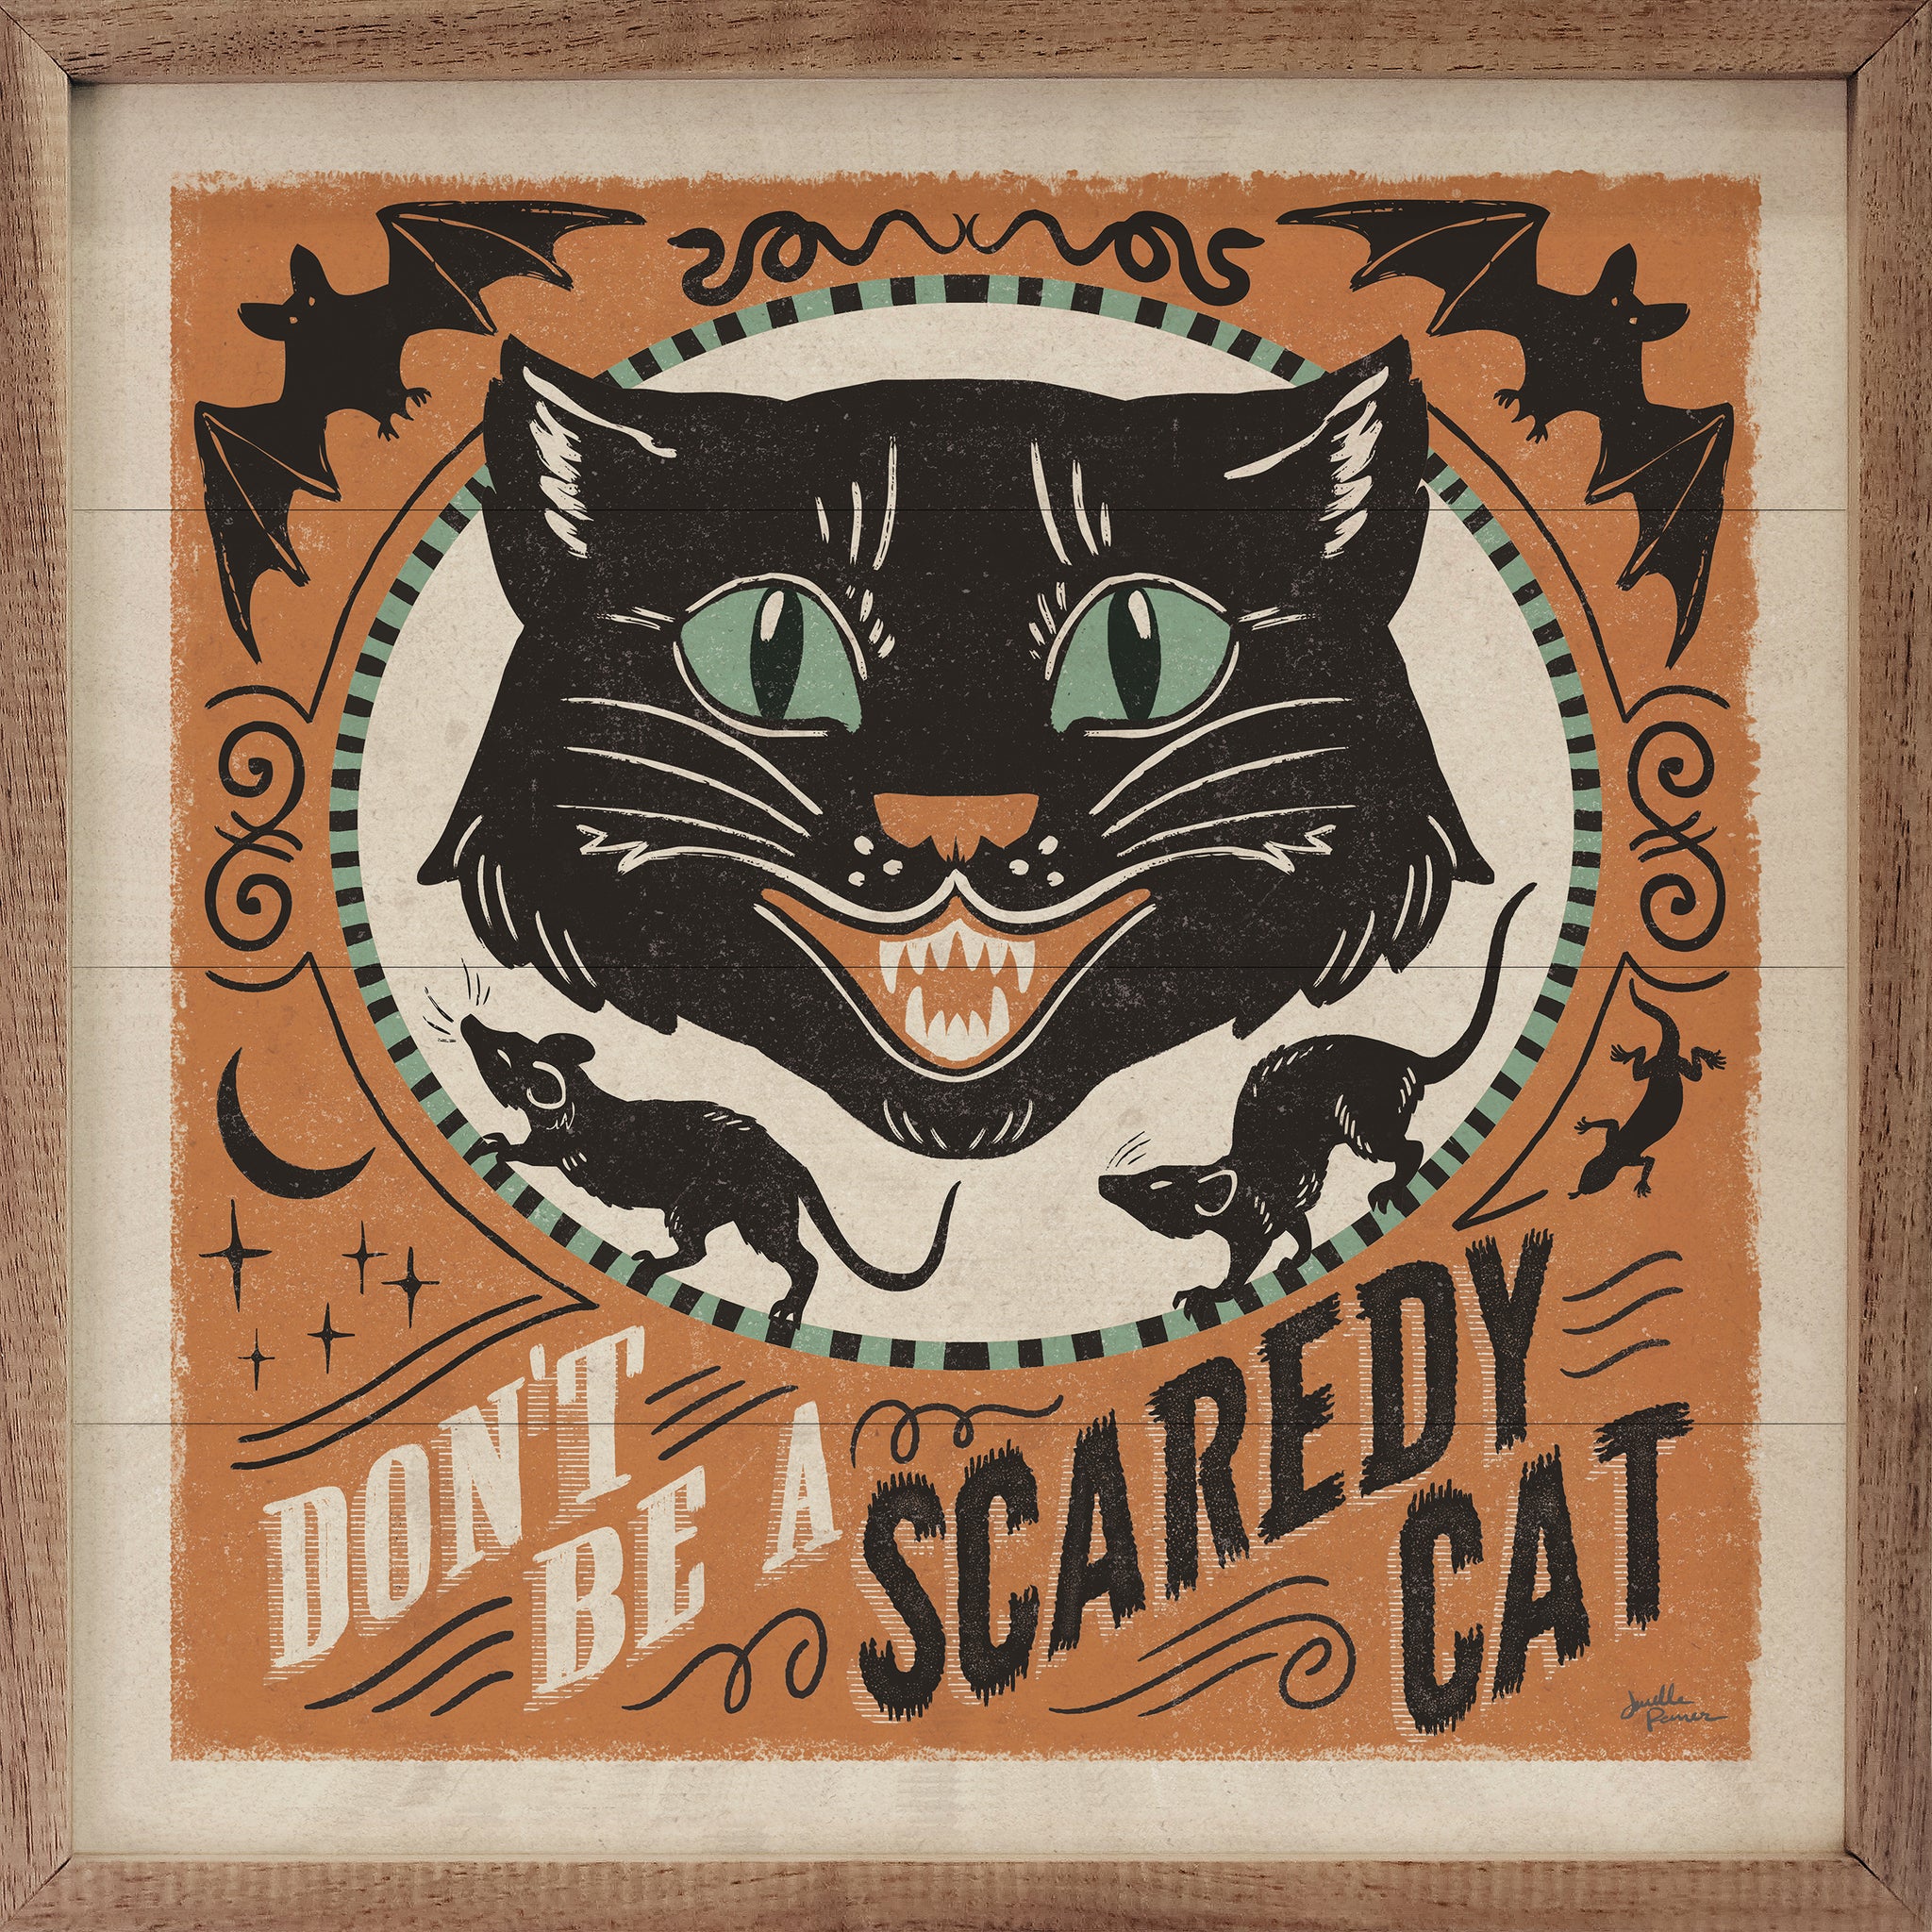 Scaredy cats | Poster